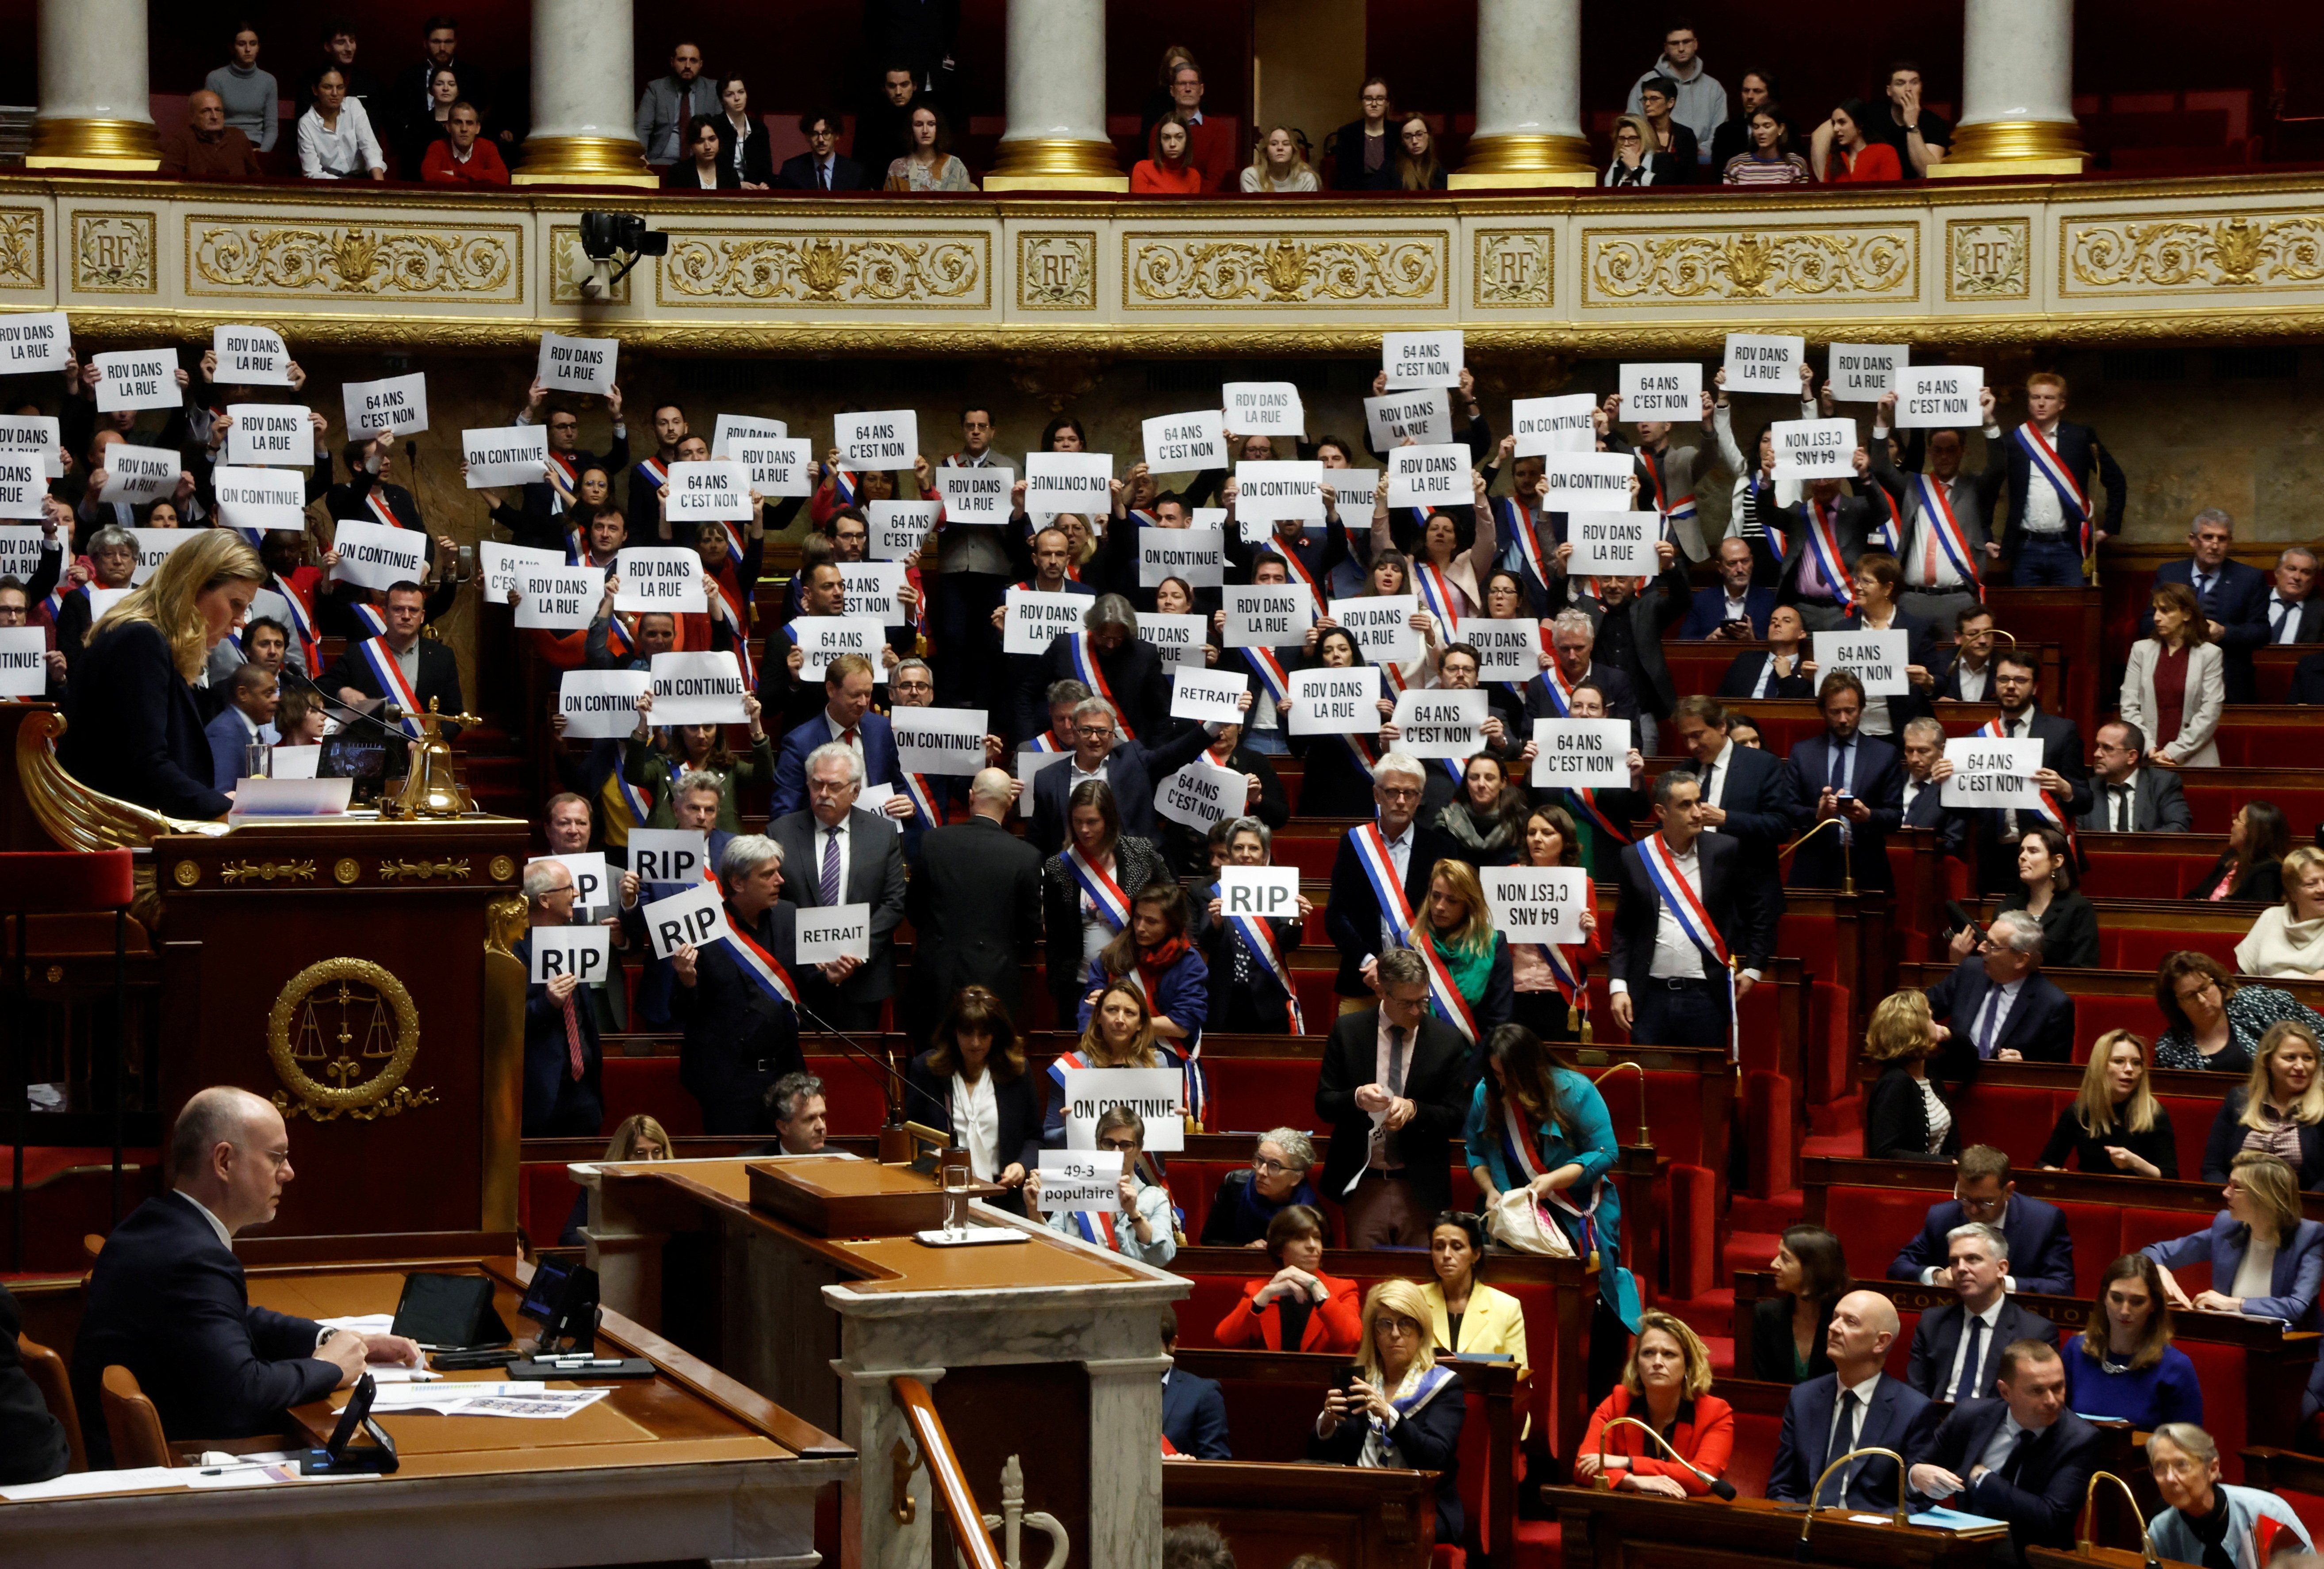 Members of parliament hold placards after the result of the vote on the first motion of no-confidence against the French government at the National Assembly in Paris, France, March 20, 2023.